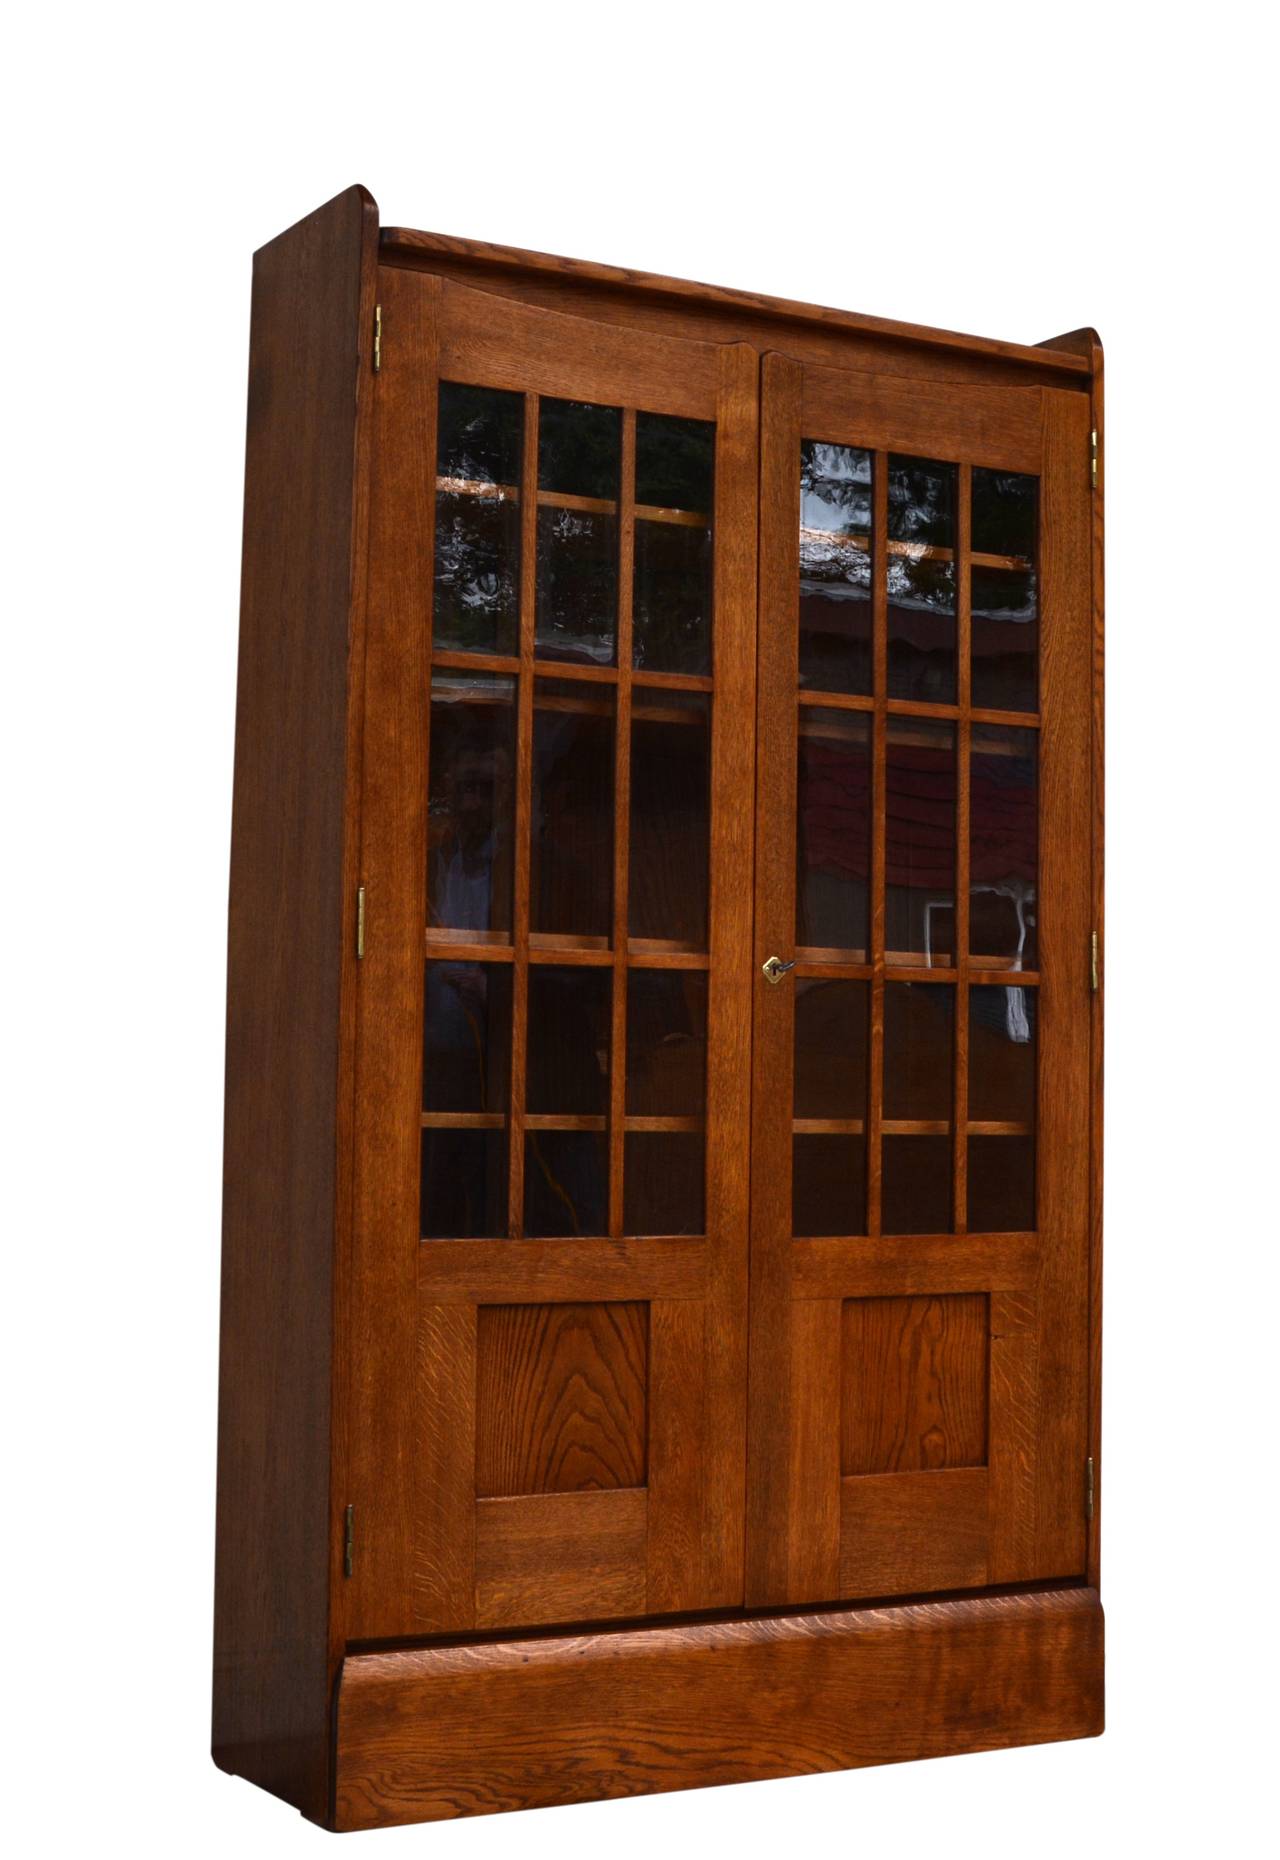 Richard Riemerschmid Glass Cabinet from 1905. 

Very rare Art Nouveau object of museum quality. Made of solid oak wood. It features coffered doors and latticed windows.

The locks and fittings are made of polished brass and are originals. The